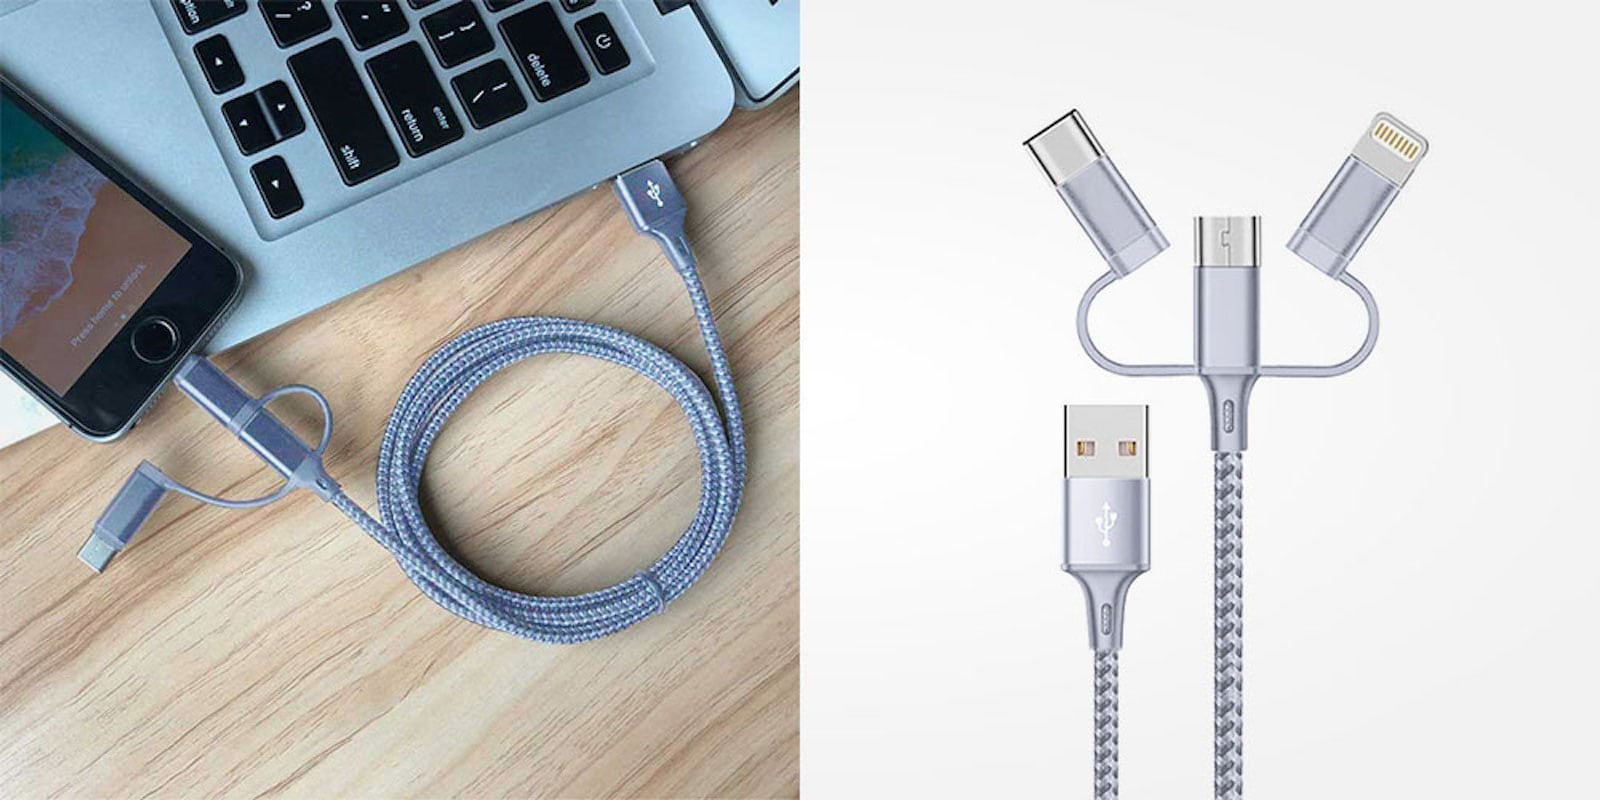 This single cable can charge and sync Micro USB, Lightning, and USB-C devices.